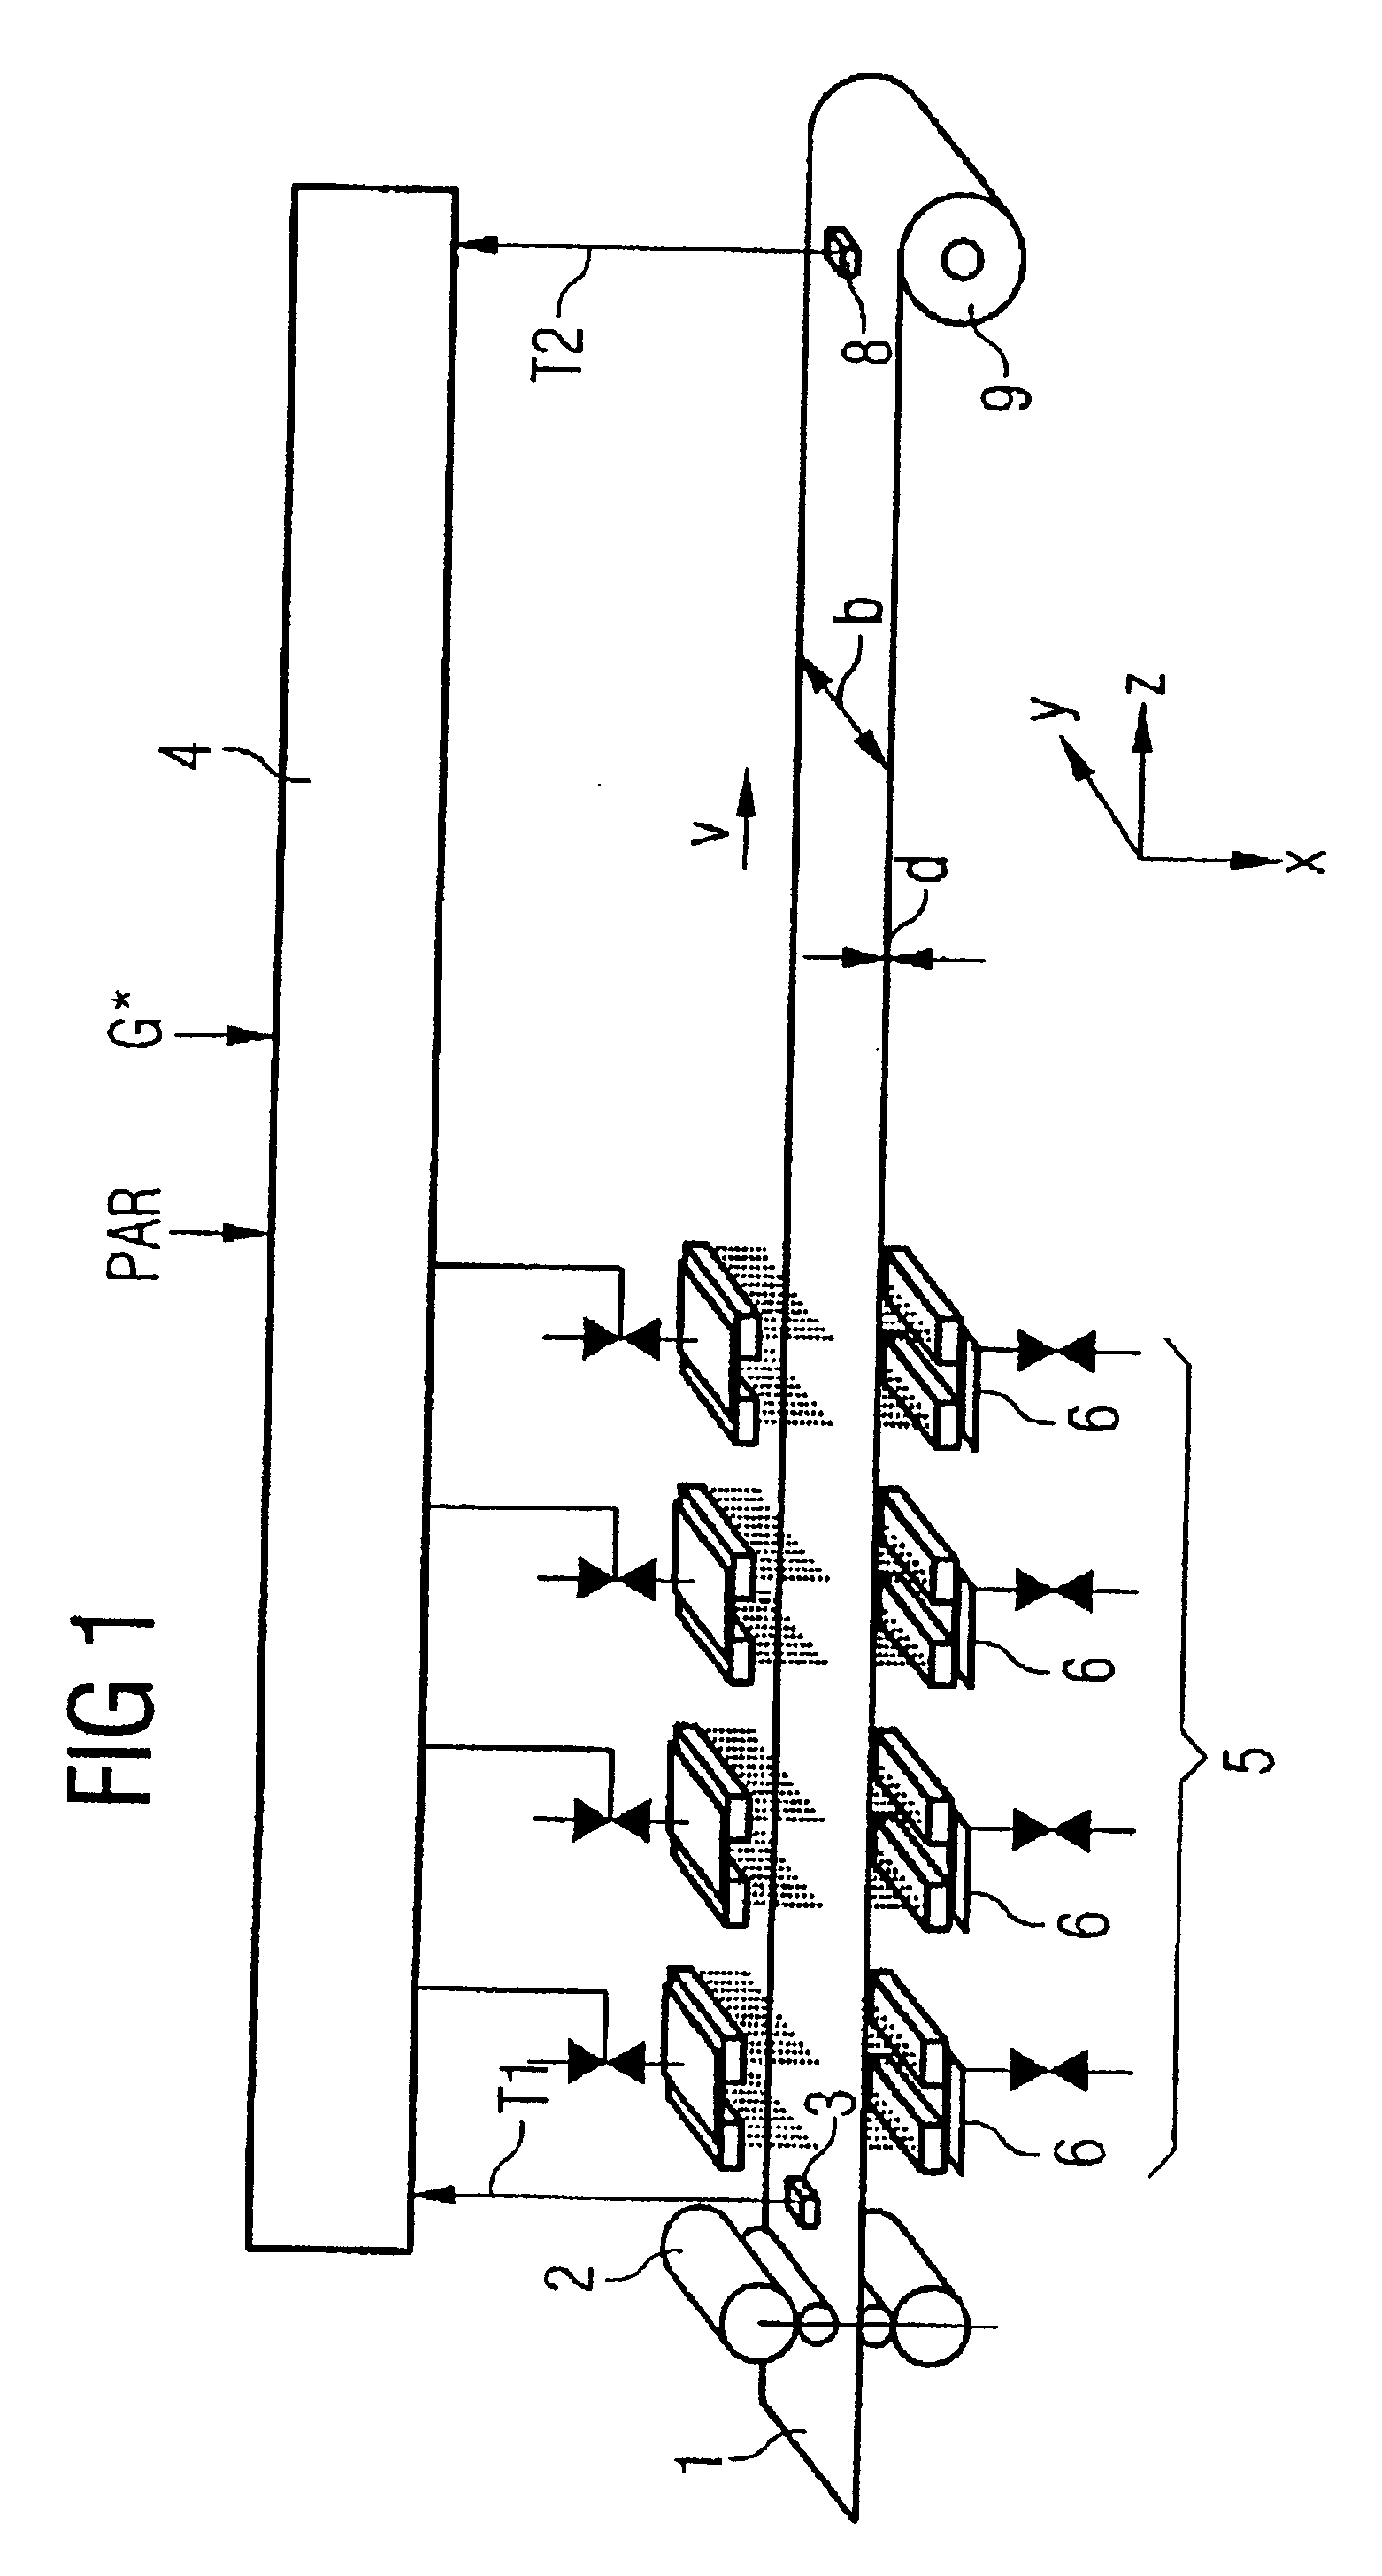 Method for cooling a hot-rolled material and corresponding cooling-line models